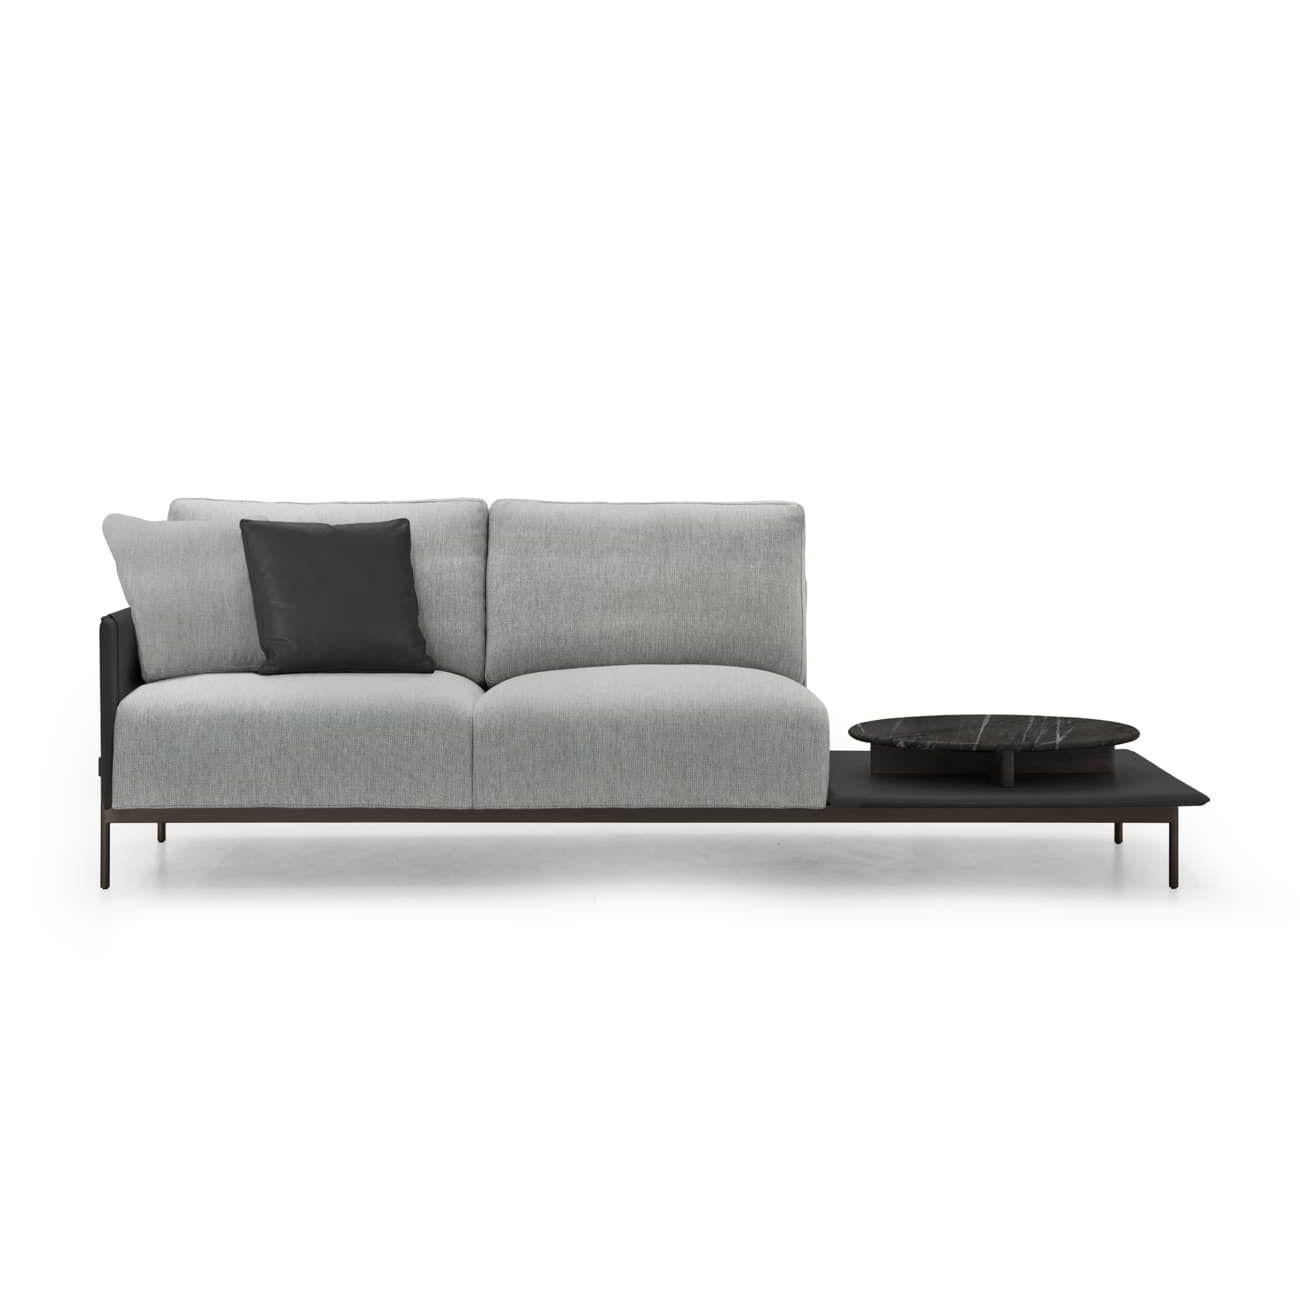 Hand-Crafted Contemporary Design, Iconic Sofa with Tray in Natural Saddle Leather V215/T For Sale